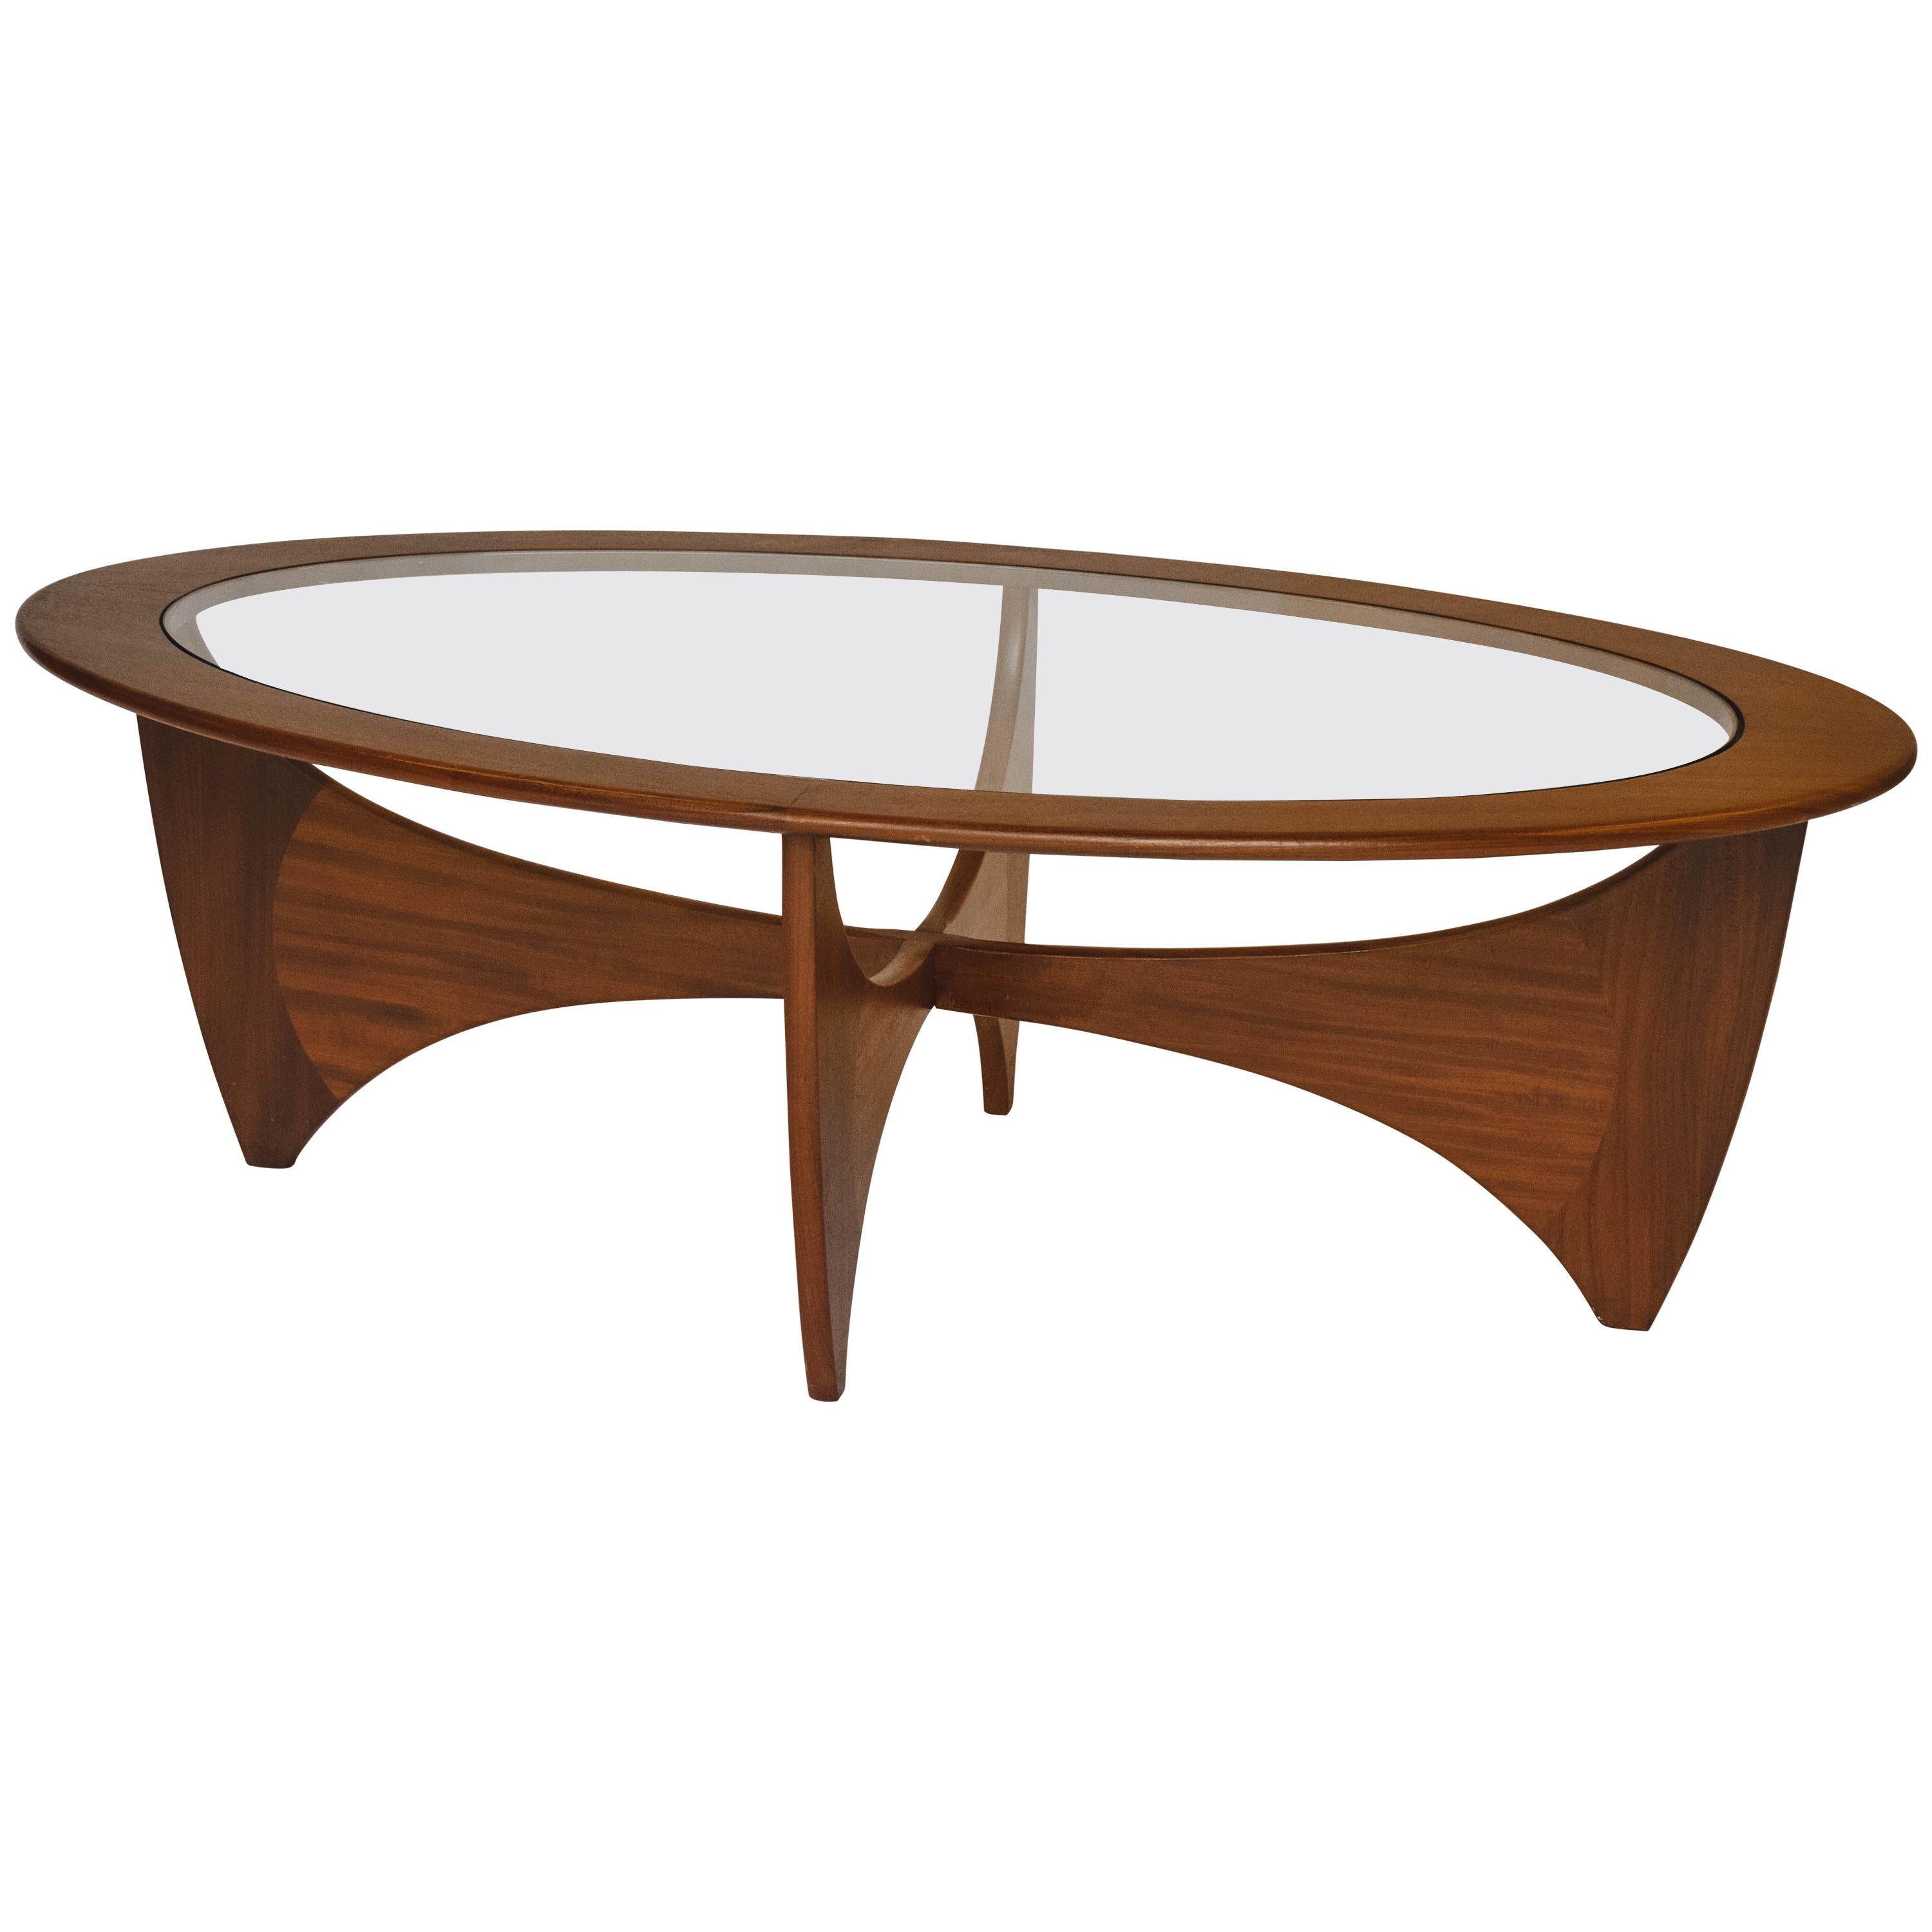 Midcentury Oval 'Astro' Coffee Table with Glass Top by G-Plan, 1960